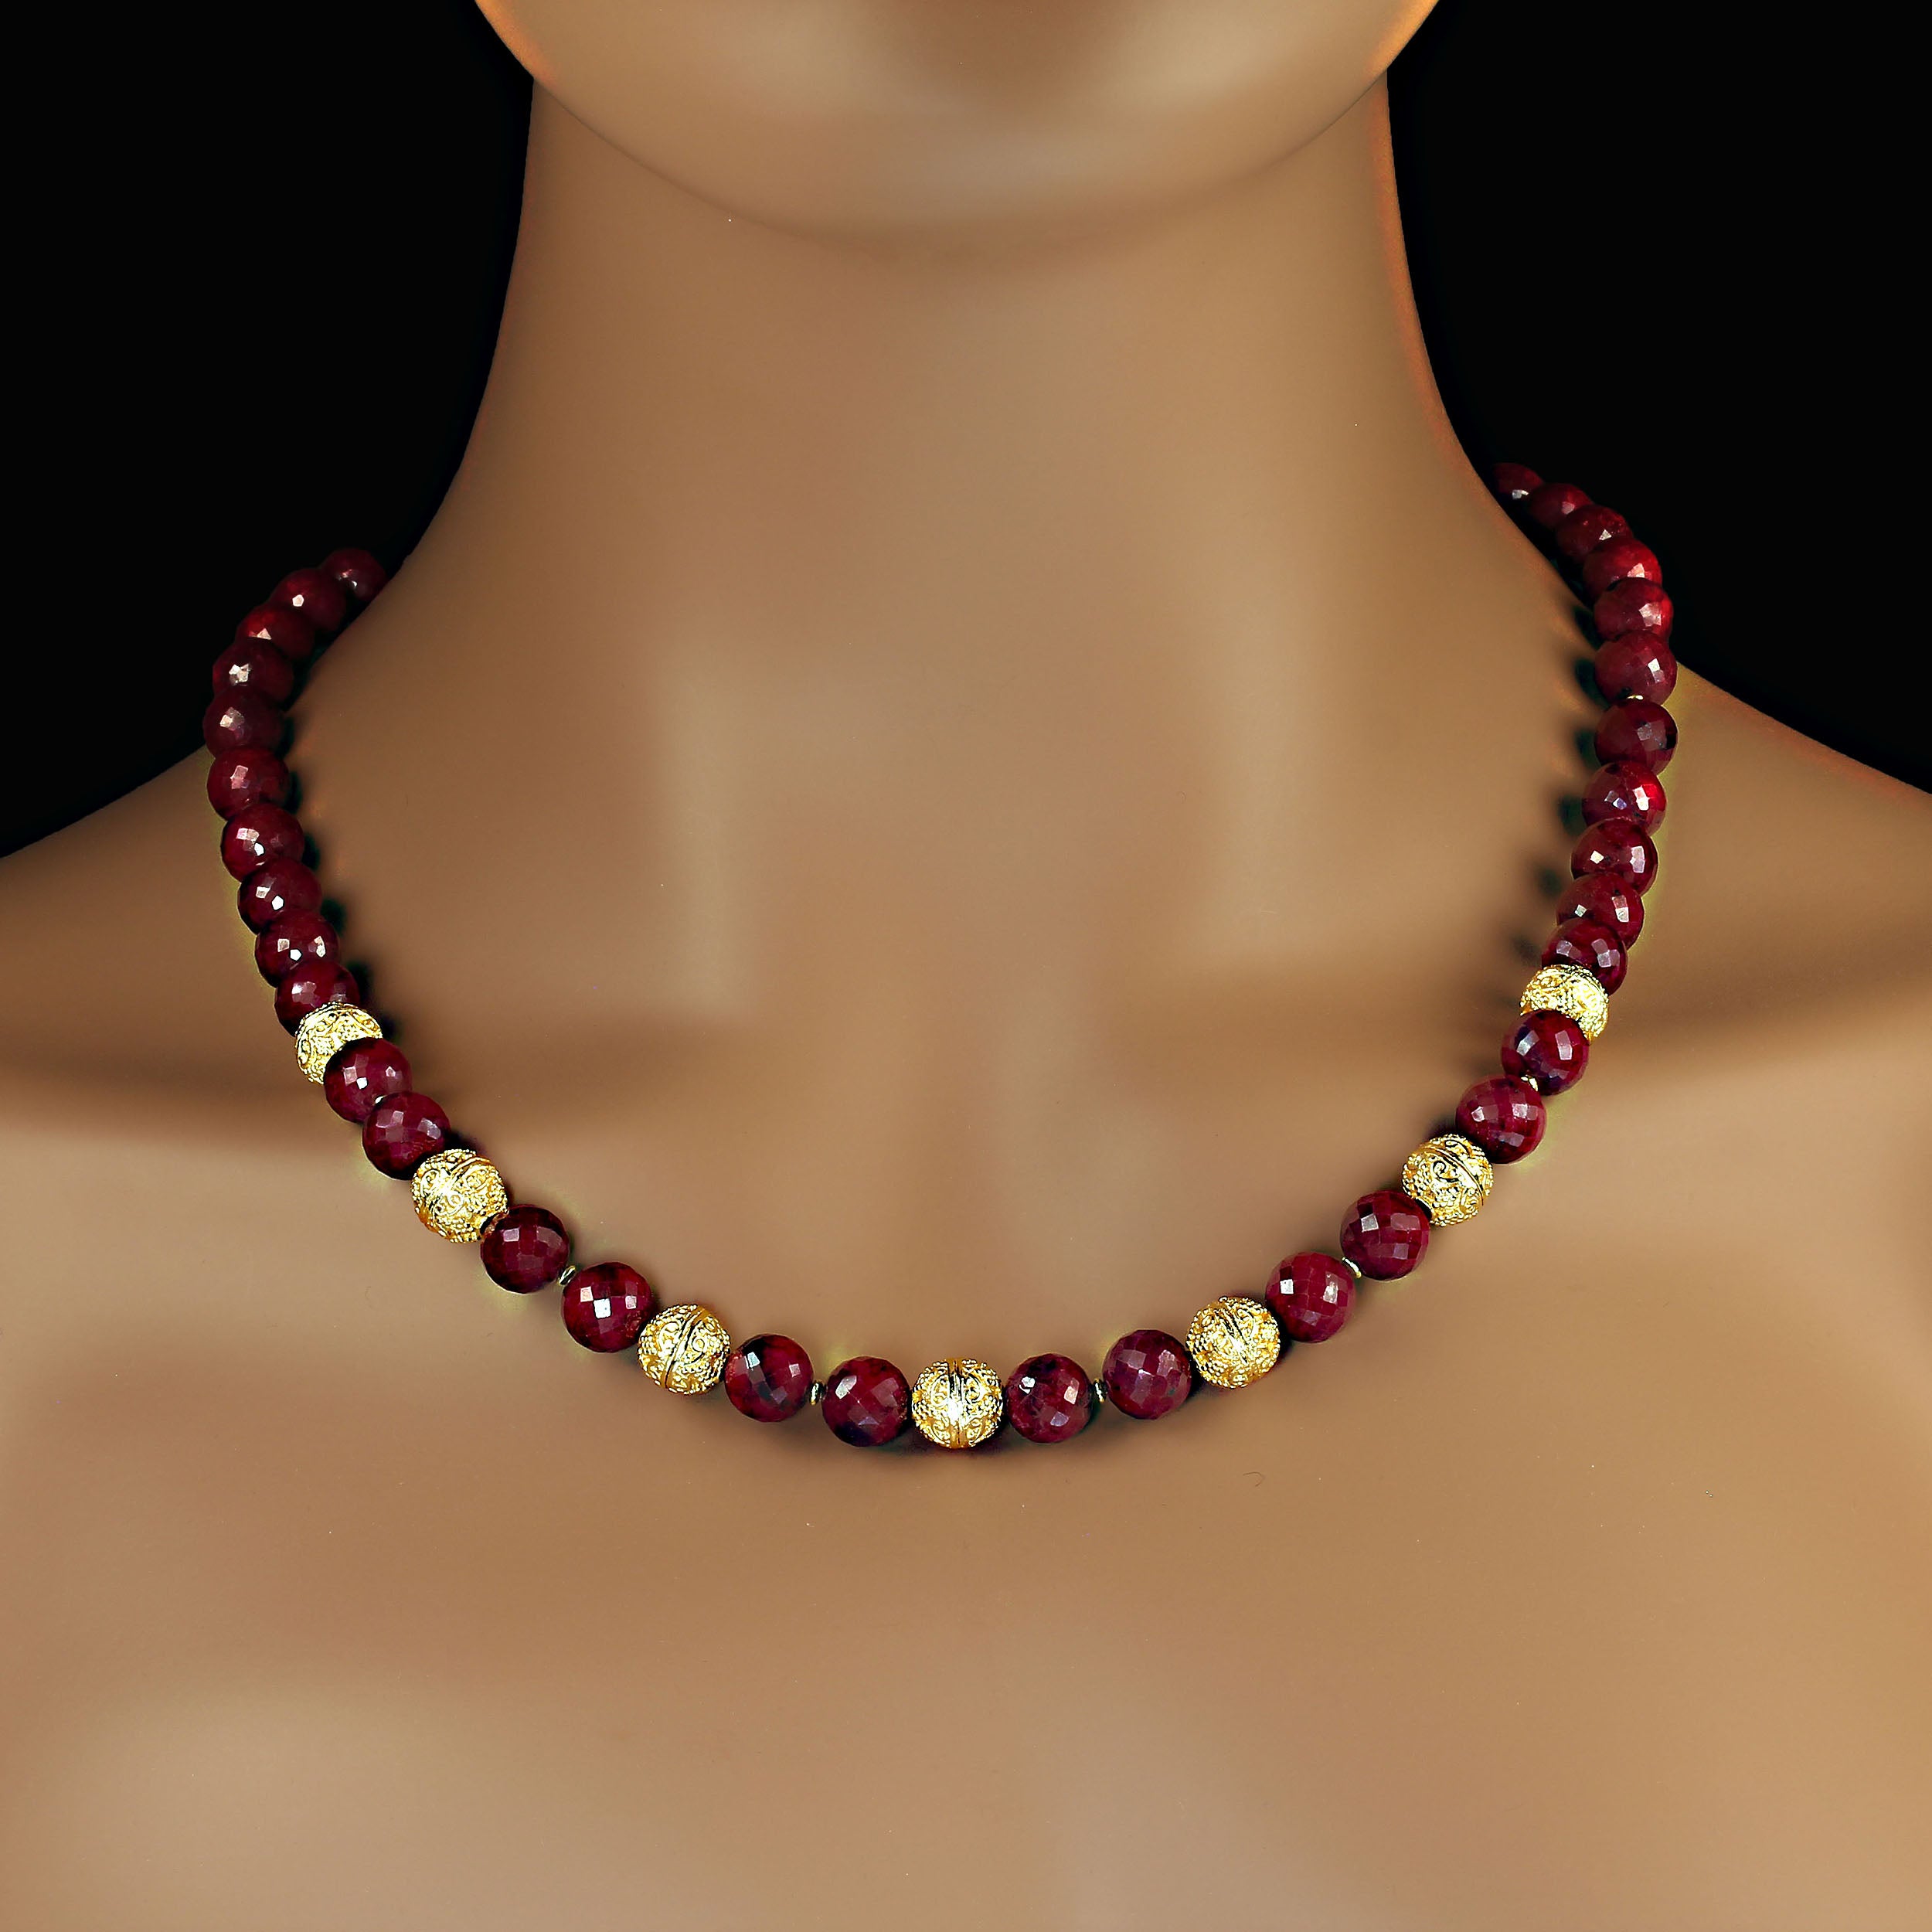 AJD Elegant faceted Ruby beaded necklace with goldy accents 21 Inches. For Sale